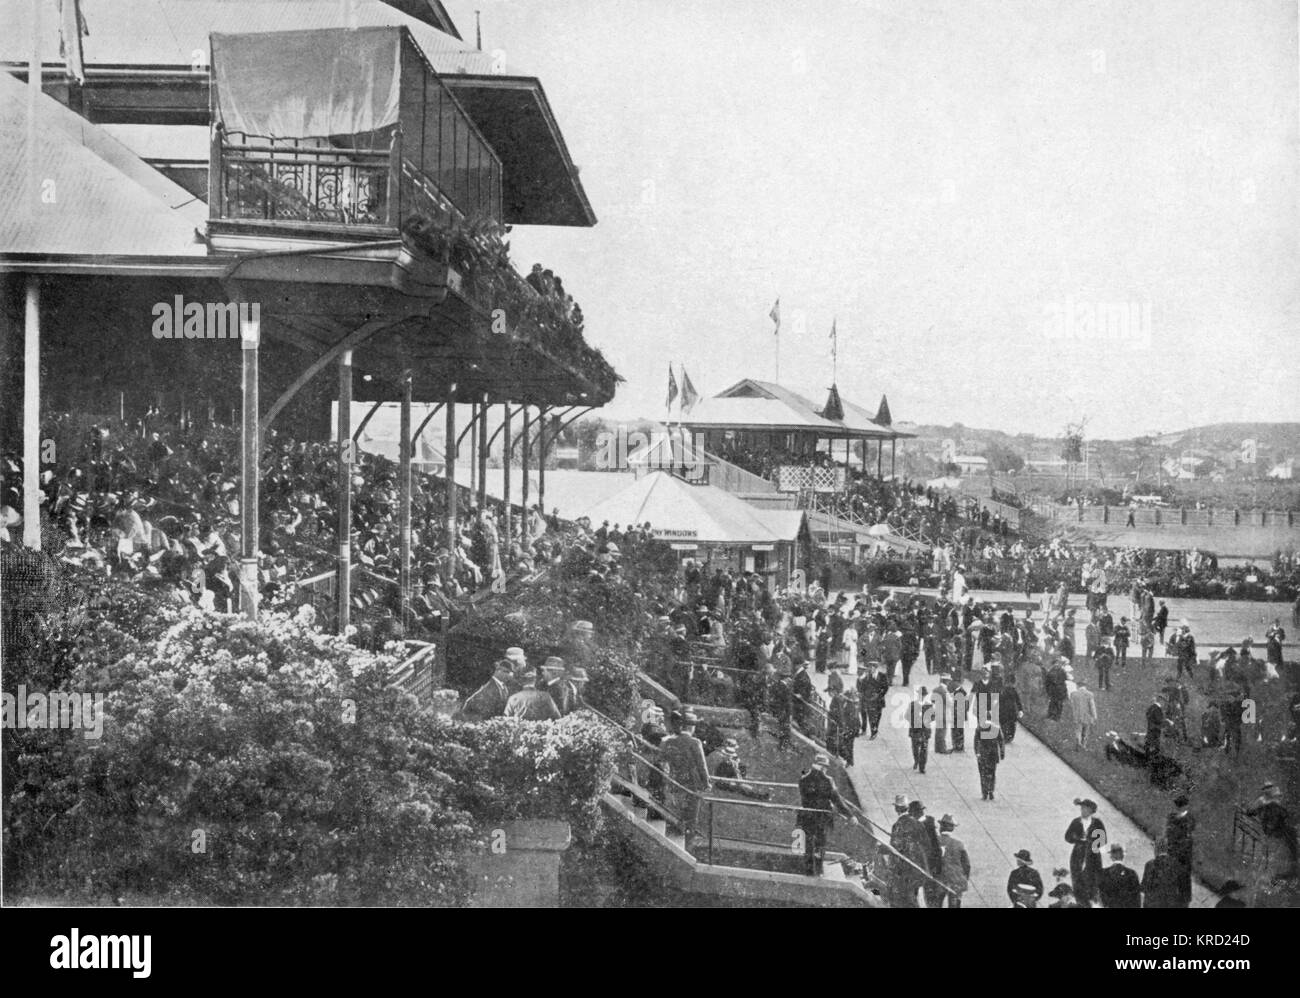 The Reserve Stand, Kalgoorlie racecourse, Western Australia.  Cup Day     Date: 1918 Stock Photo